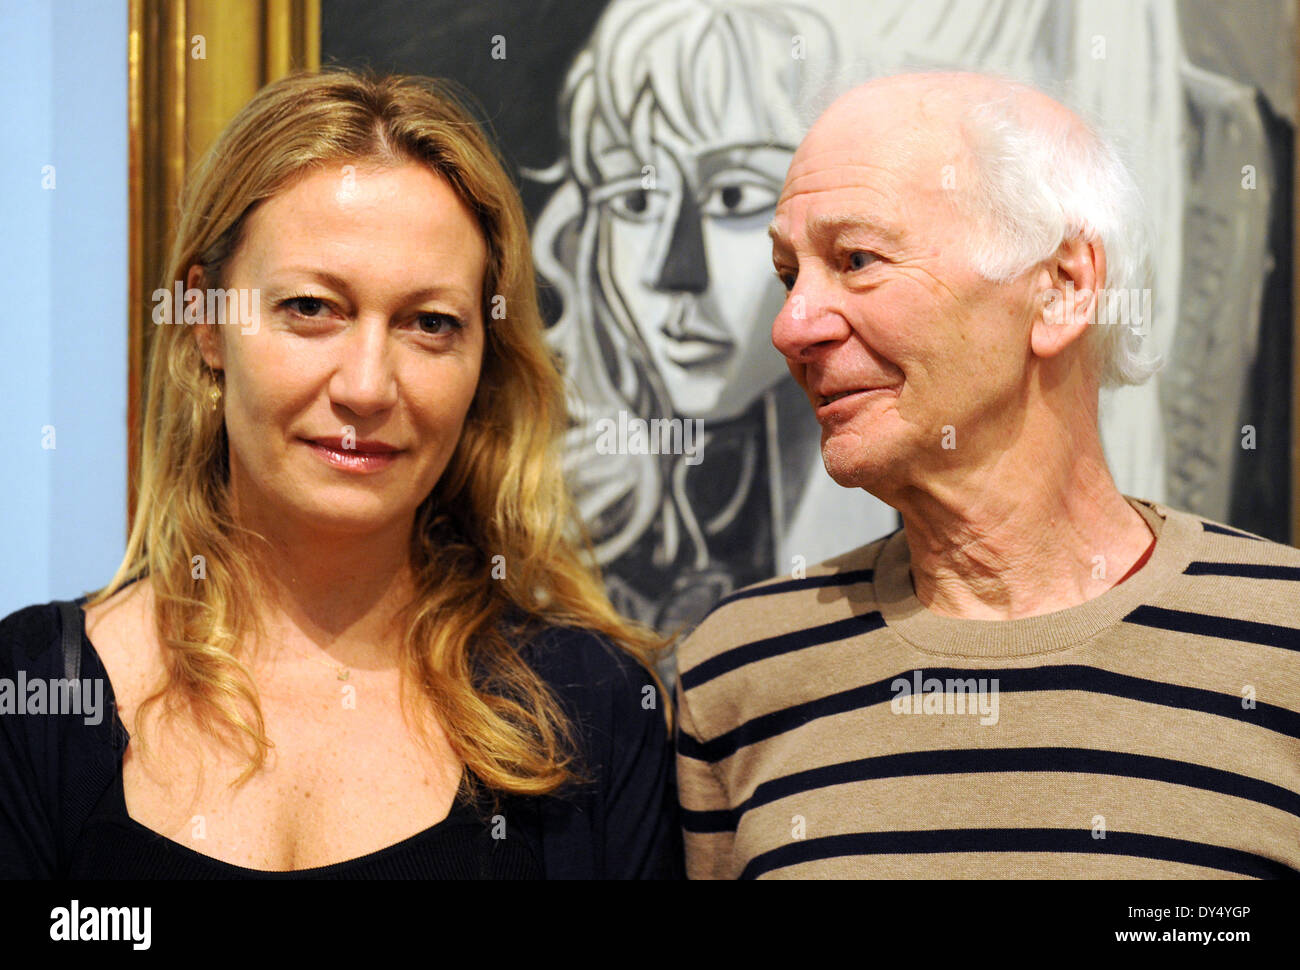 Bremen, Germany. 07th Apr, 2014. Grand-daughter of Picasso Diana Widmaier Picasso and former husband of Sylvette David, Toby Jellinek, pose in front of a Sylvette painting in the 'Sylvette, Sylvette, Sylvette: Picasso and the model' exhibition at Kunsthalle in Bremen, Germany, 07 April 2014. Photo: CARMEN JASPERSEN/dpa/Alamy Live News Stock Photo